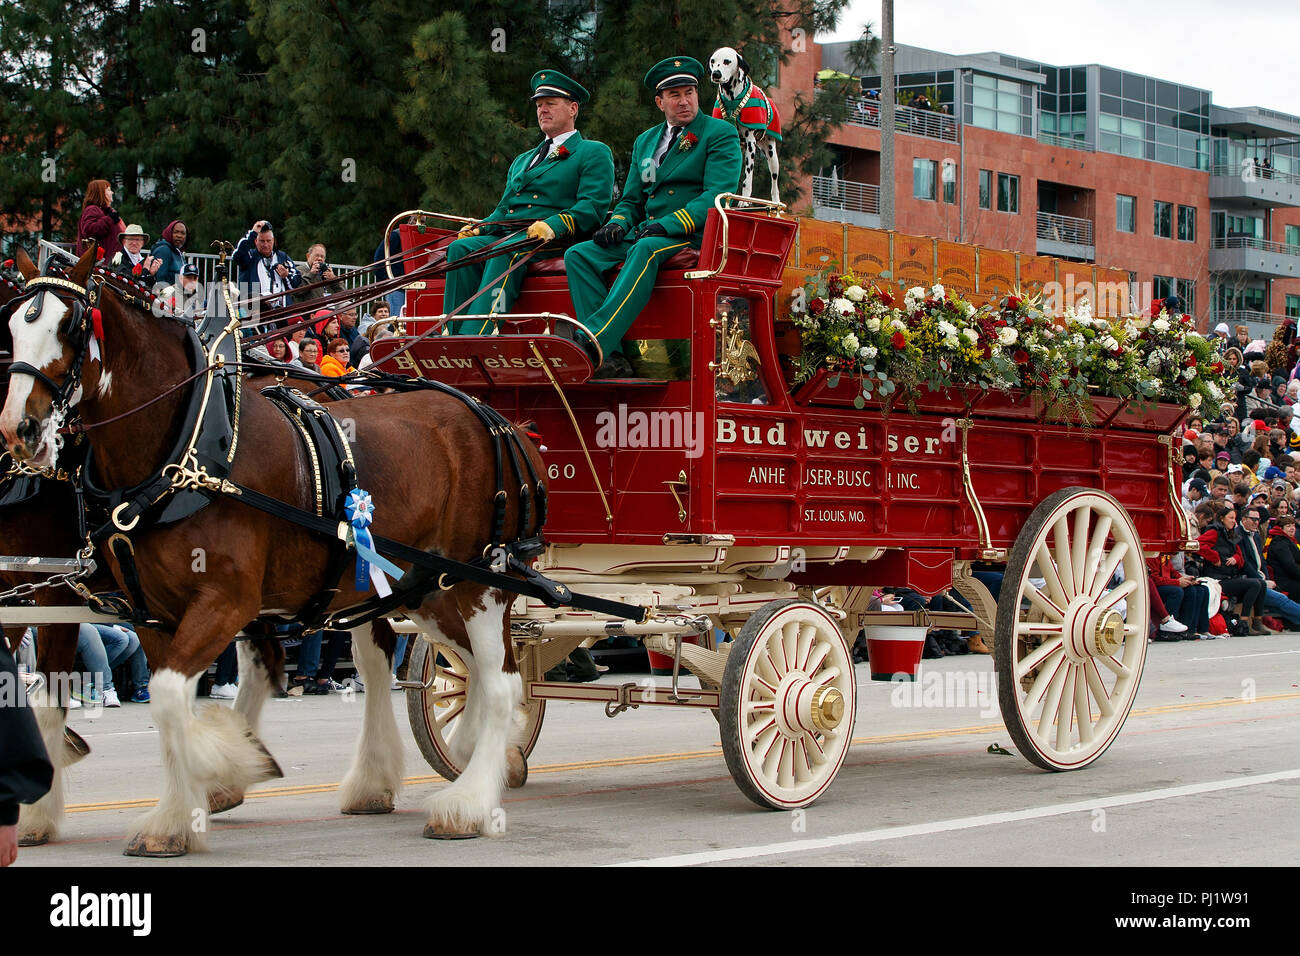 Budweiser Clydesdale Horses and Wagon with Dalmatian, 2017 Tournament of Roses Parade, Rose Parade, Pasadena, California, United States of America Stock Photo